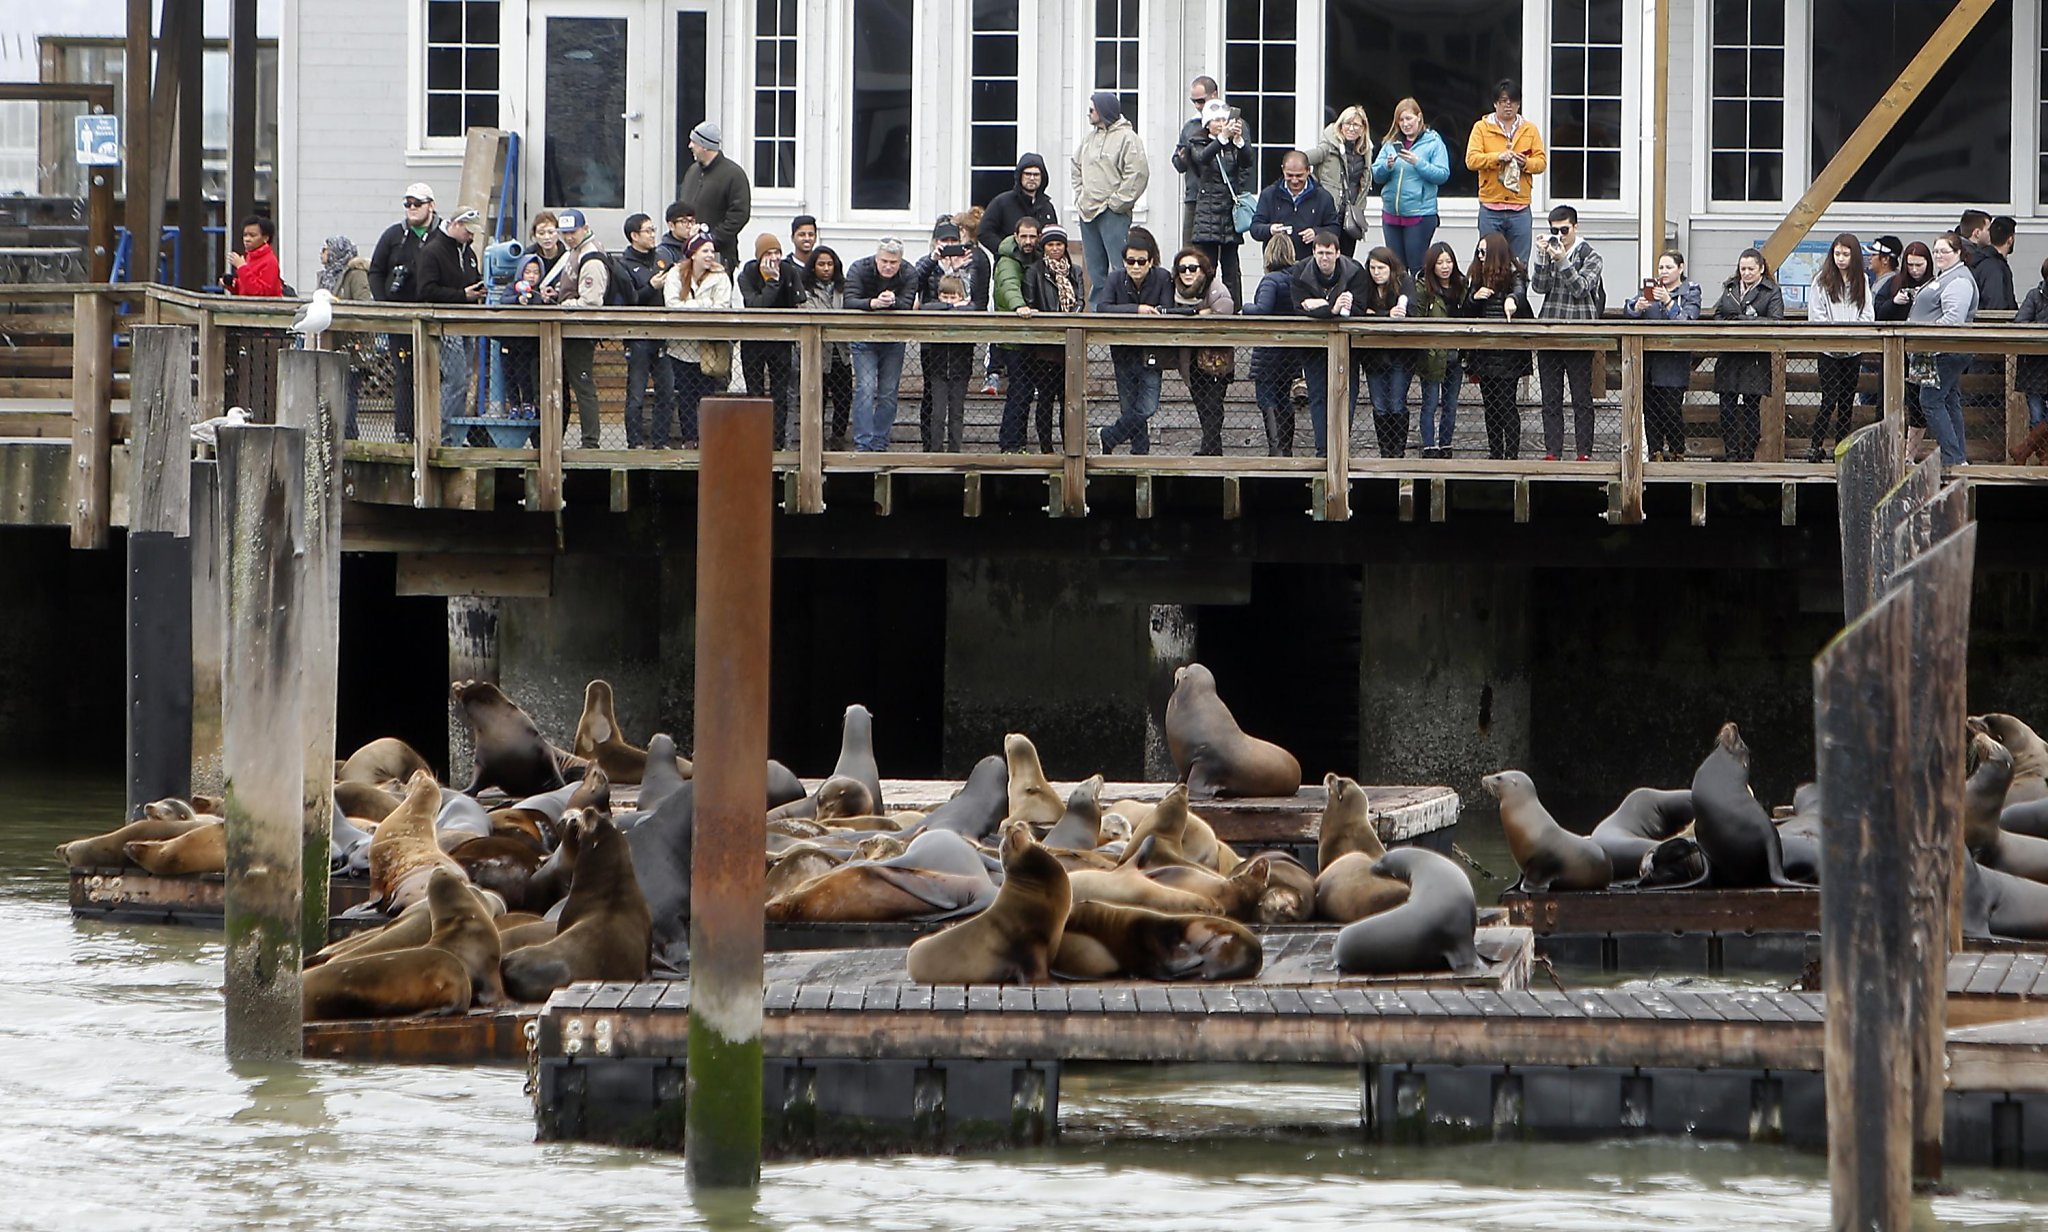 Pier 39 marks 27th anniversary of the arrival of sea lions